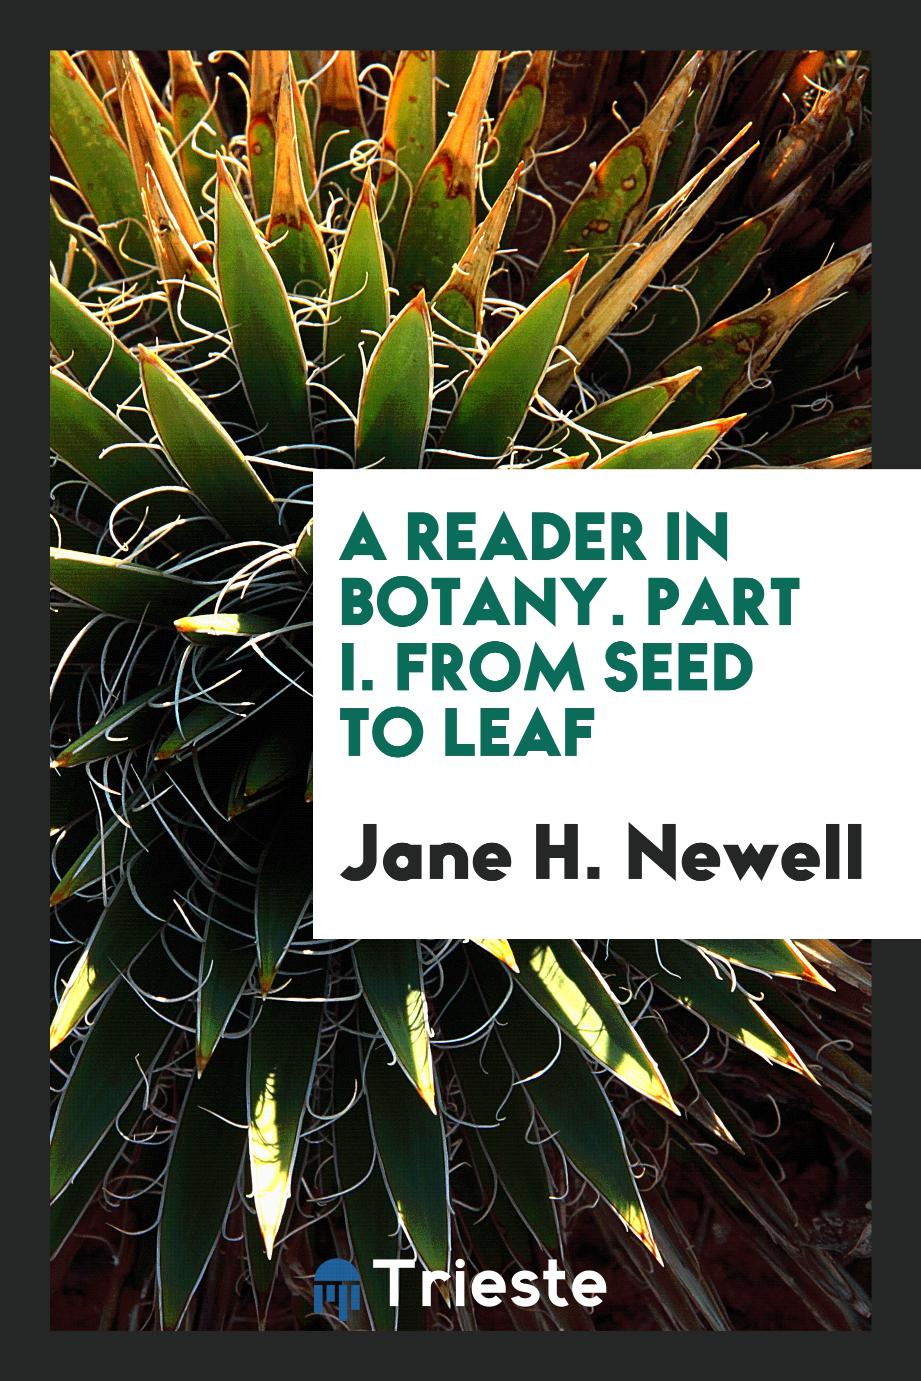 A Reader in Botany. Part I. From Seed to Leaf